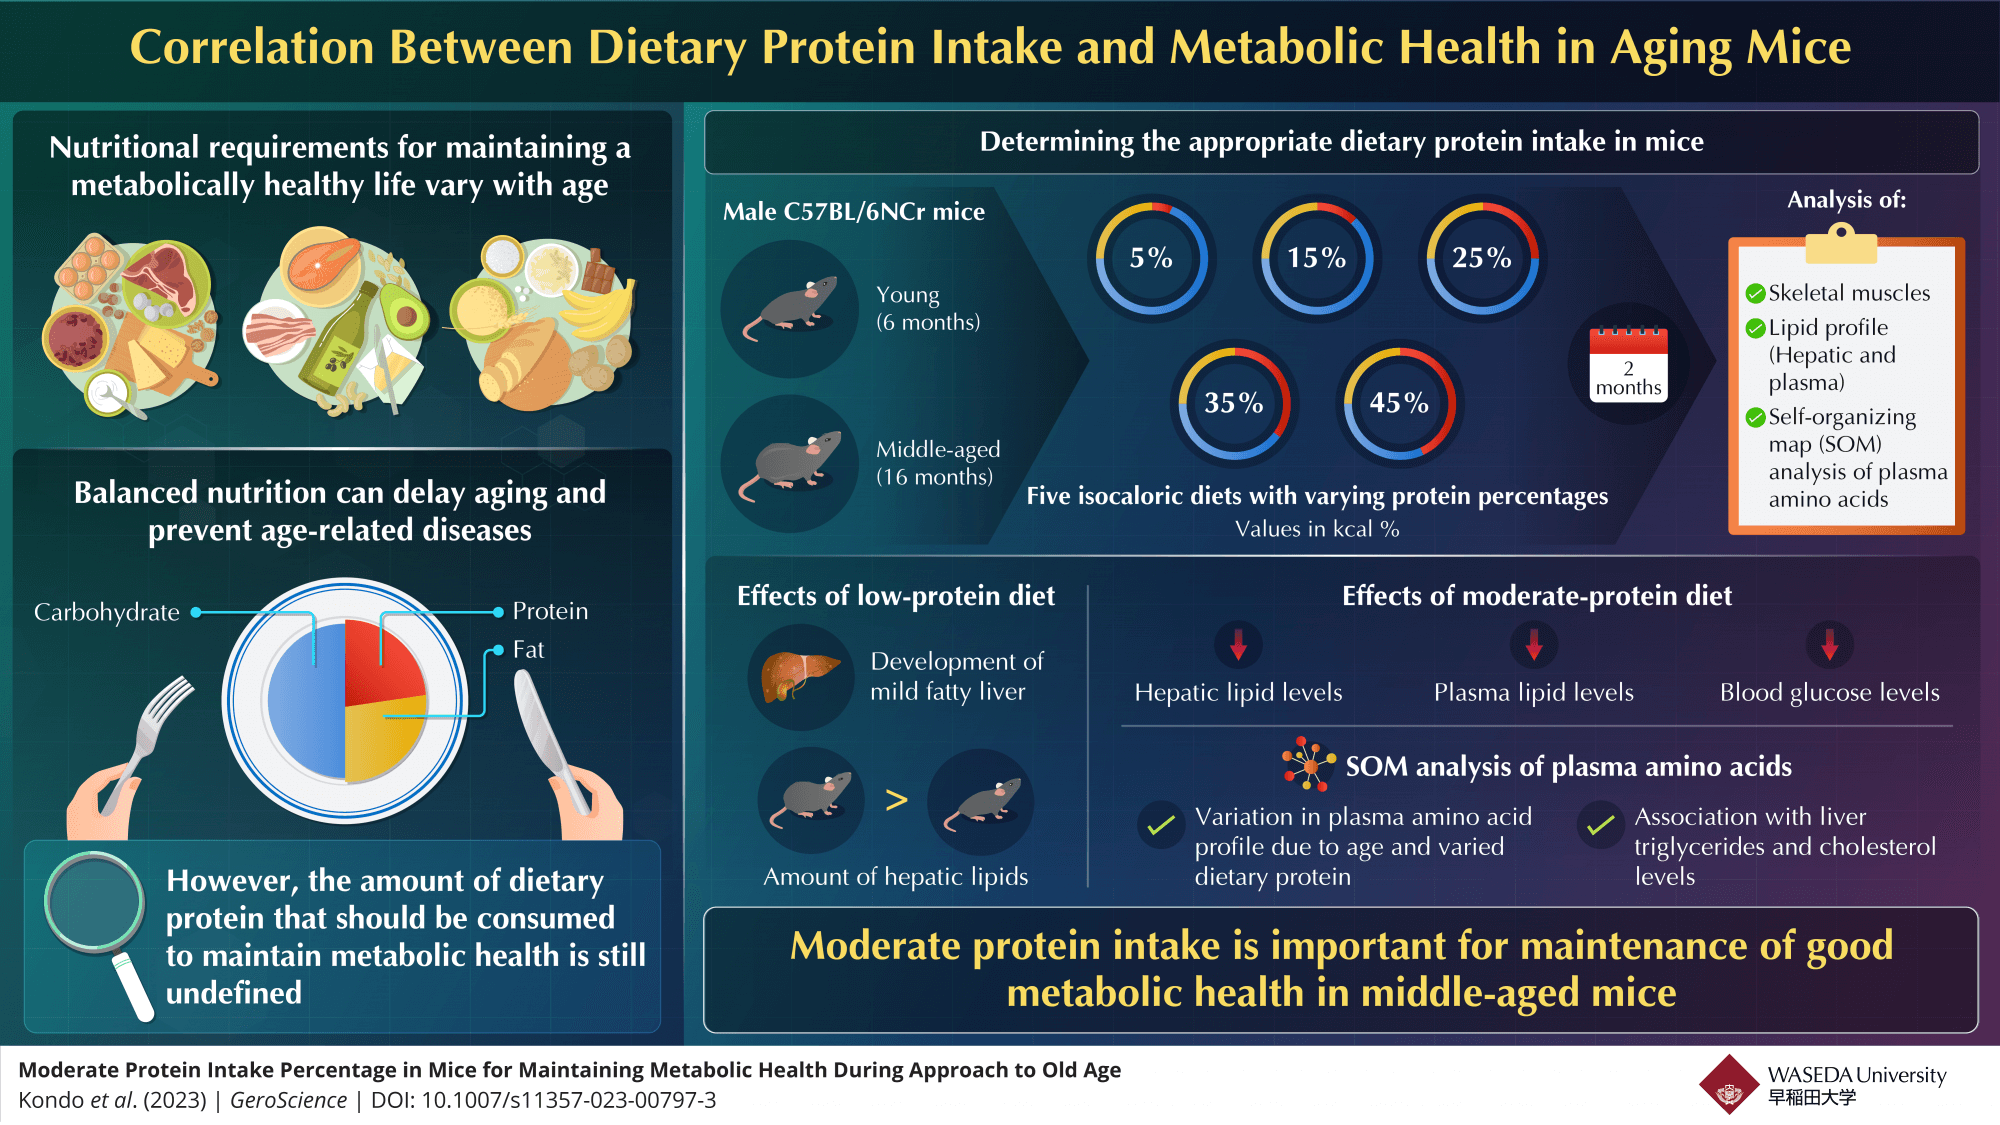 In a new study by researchers at Waseda University, young and middle-aged mice were fed isocaloric diets containing varying amounts of protein. Mice fed moderate amounts of dietary protein (25% and 35%) had reduced blood glucose, liver and plasma lipid levels.